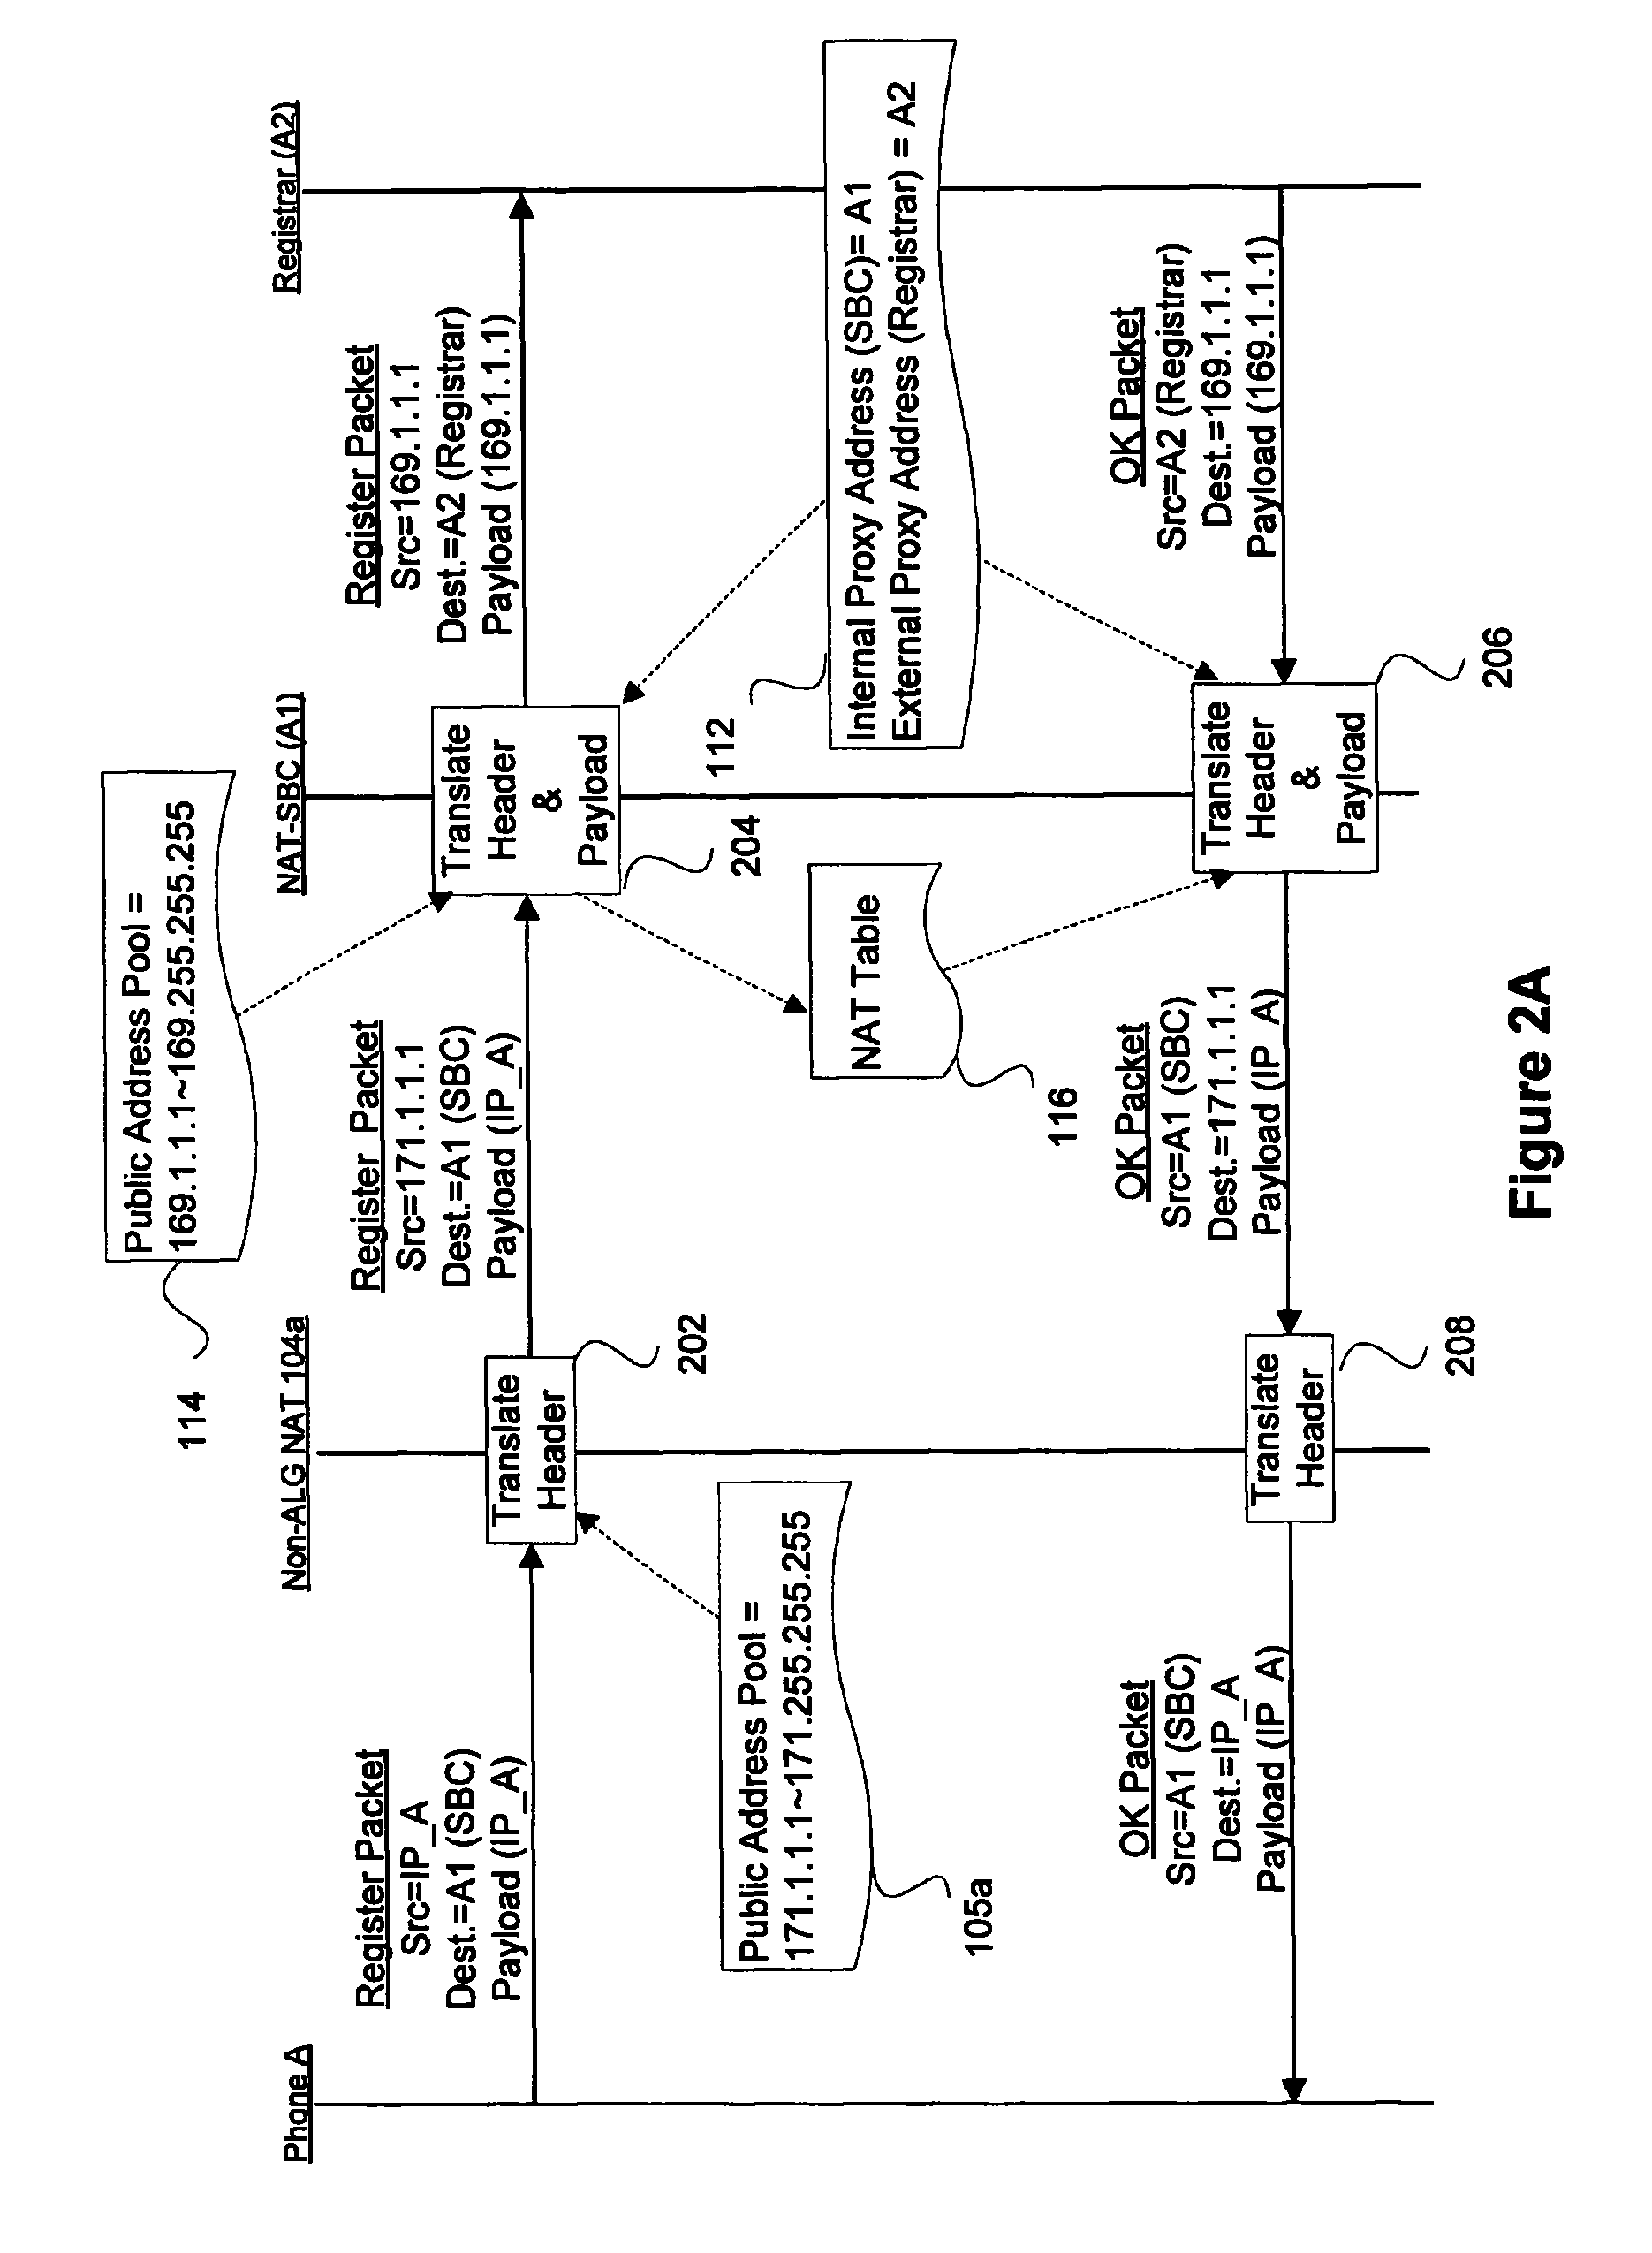 Mechanisms for using NAT at a session border controller